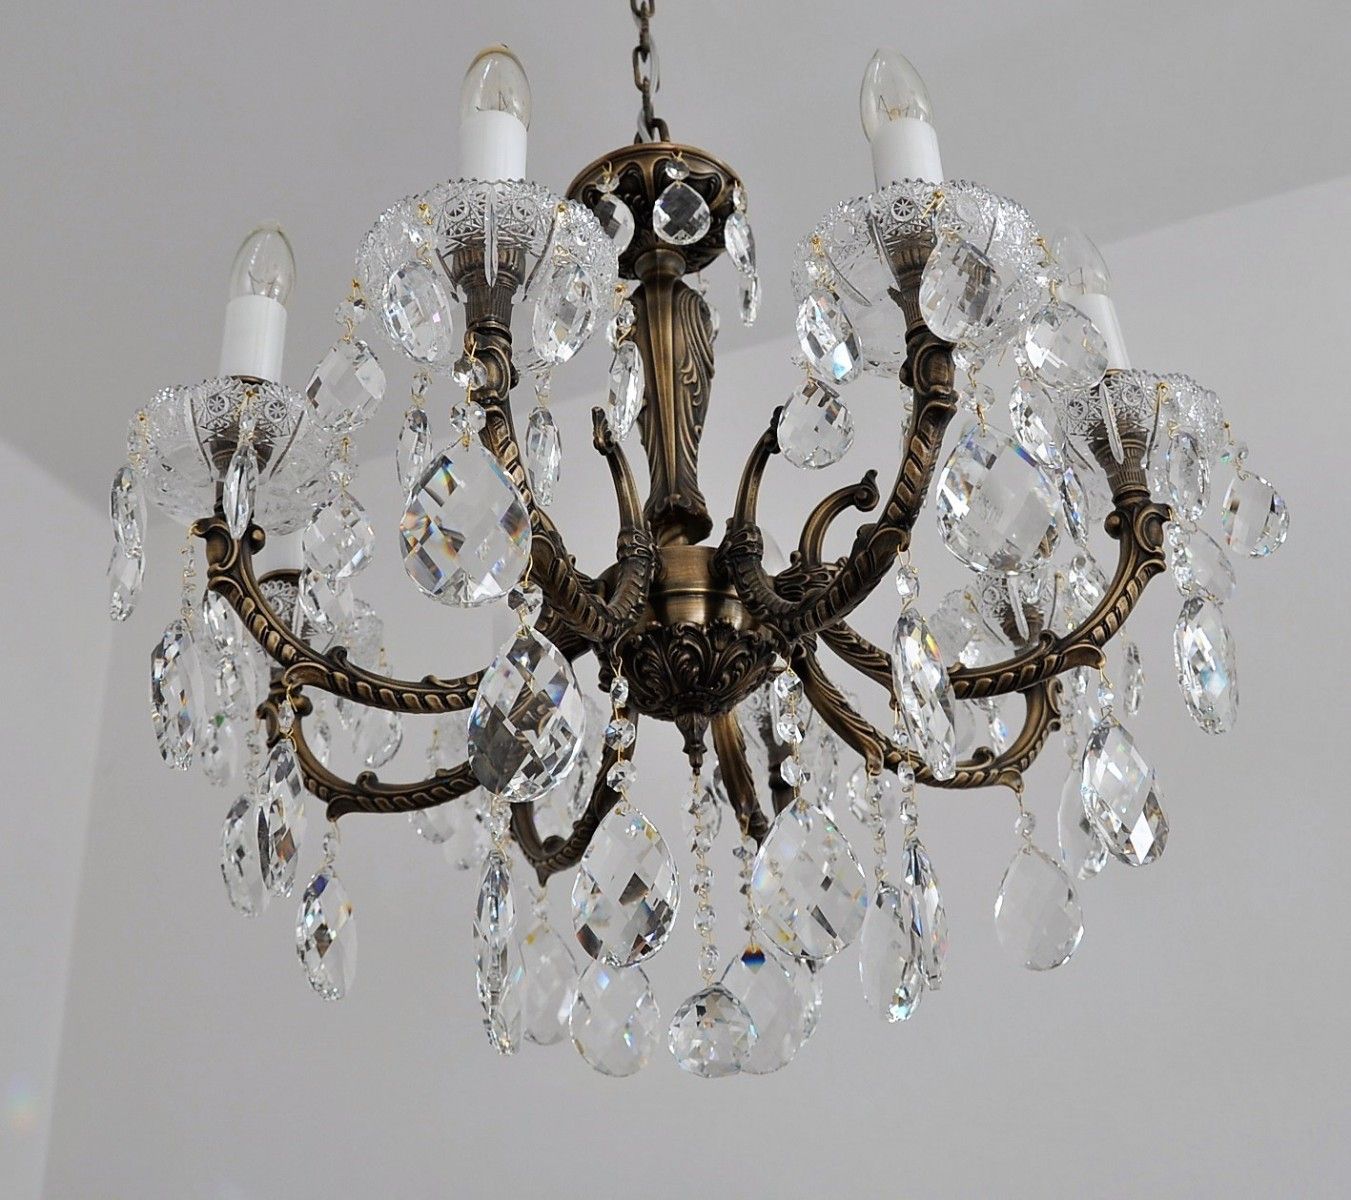 8 Arms Brown Cast Brass Crystal Chandelier – Antique Brass Within Antique Brass Seven Light Chandeliers (View 10 of 15)